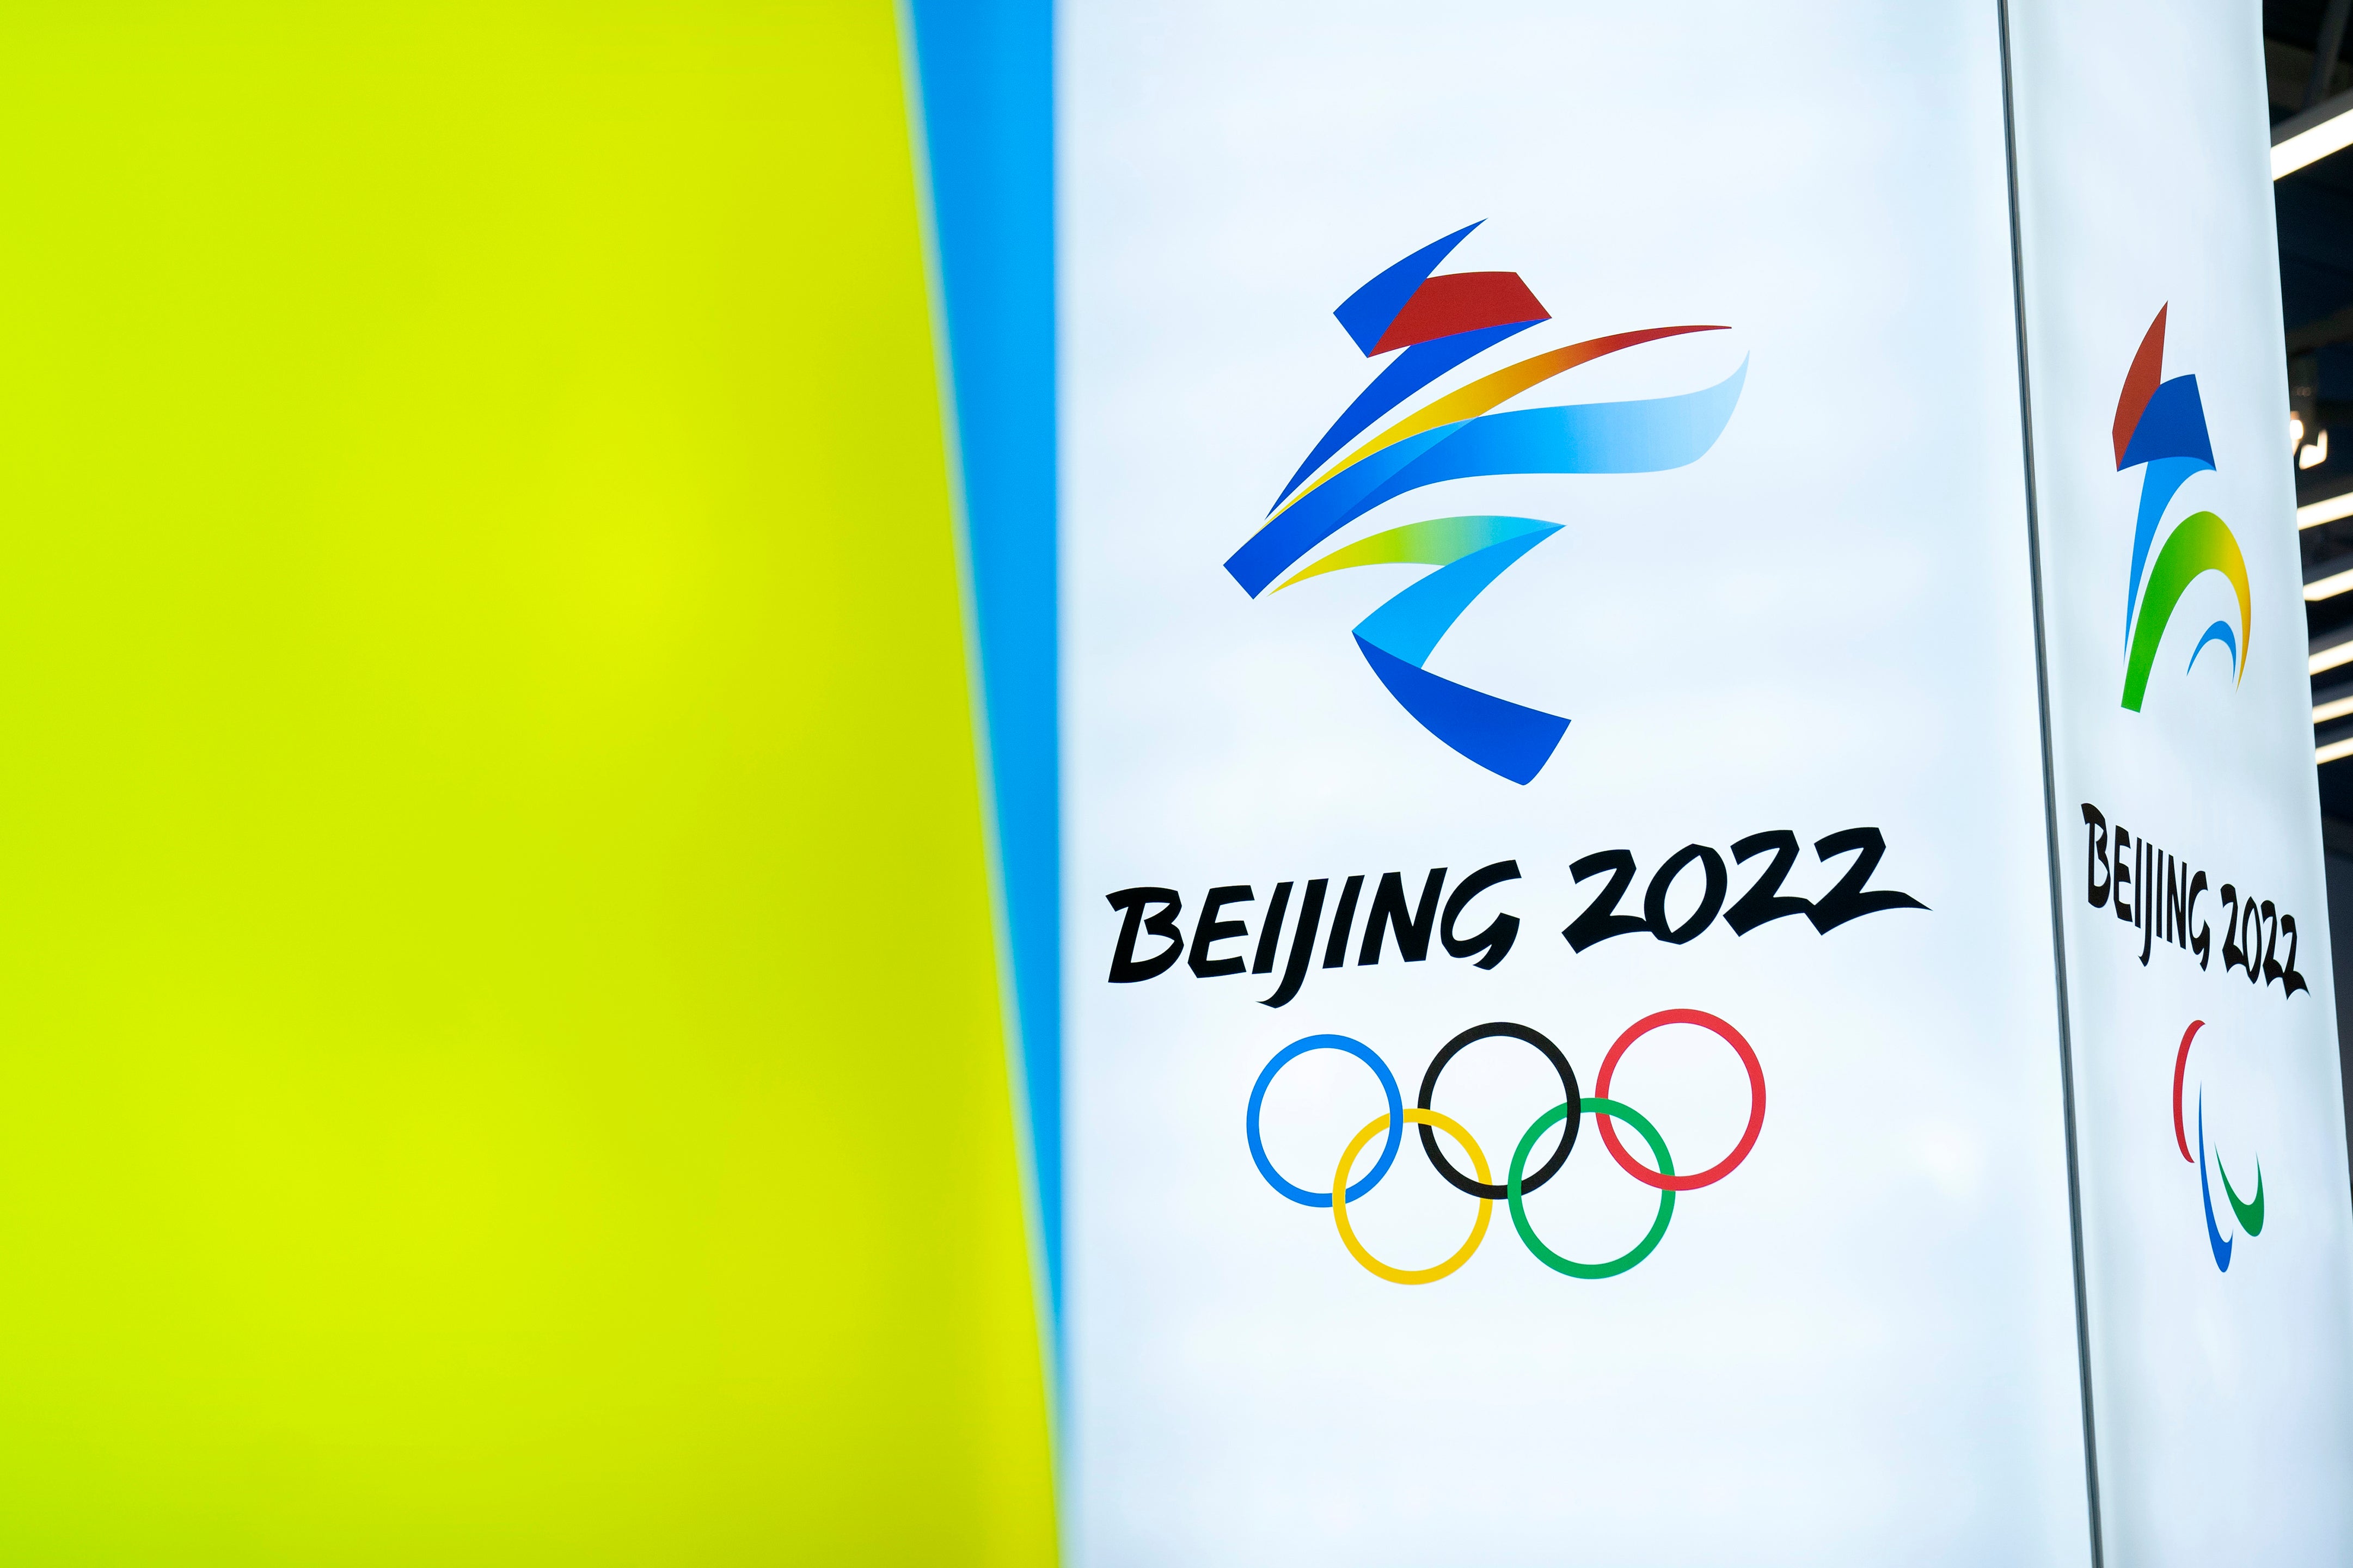 In this 5 Feb, 2021, file photo, the logos for the 2022 Beijing Winter Olympics and Paralympics are seen during an exhibit at a visitors center at the Winter Olympic venues in Yanqing on the outskirts of Beijing